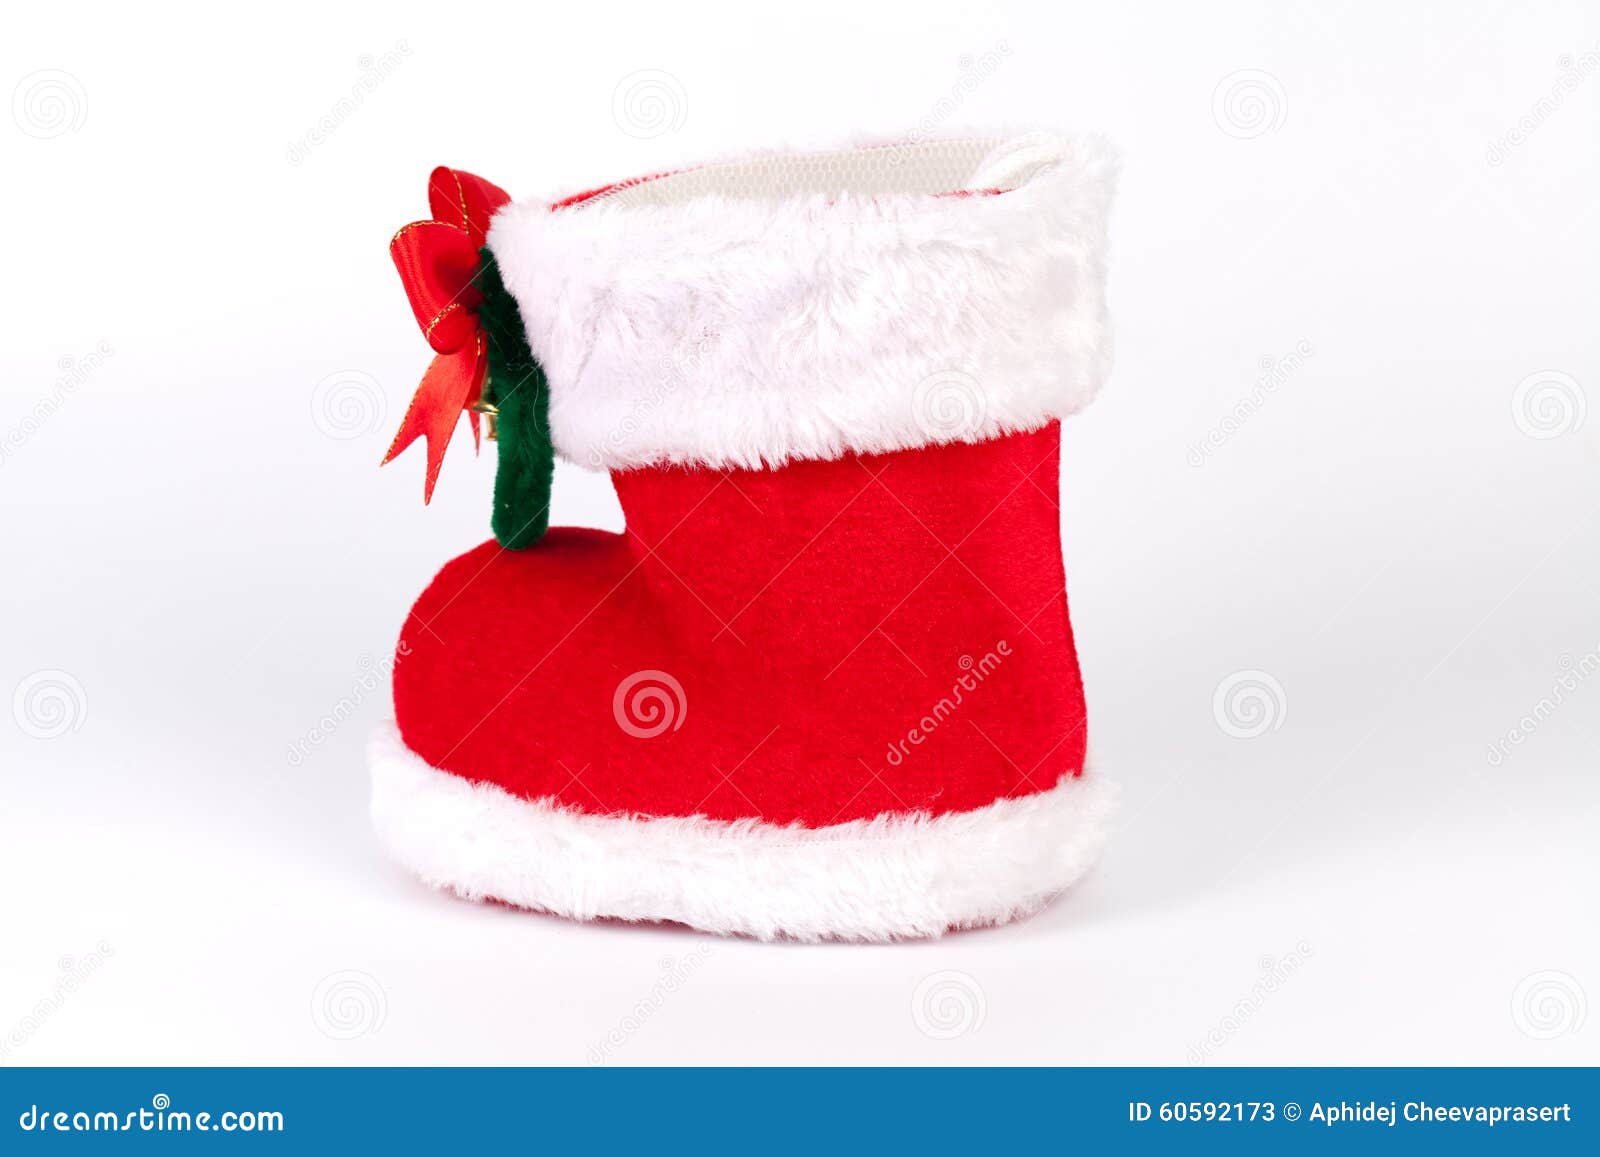 St. Claus boots stock image. Image of vacant, celebration - 60592173